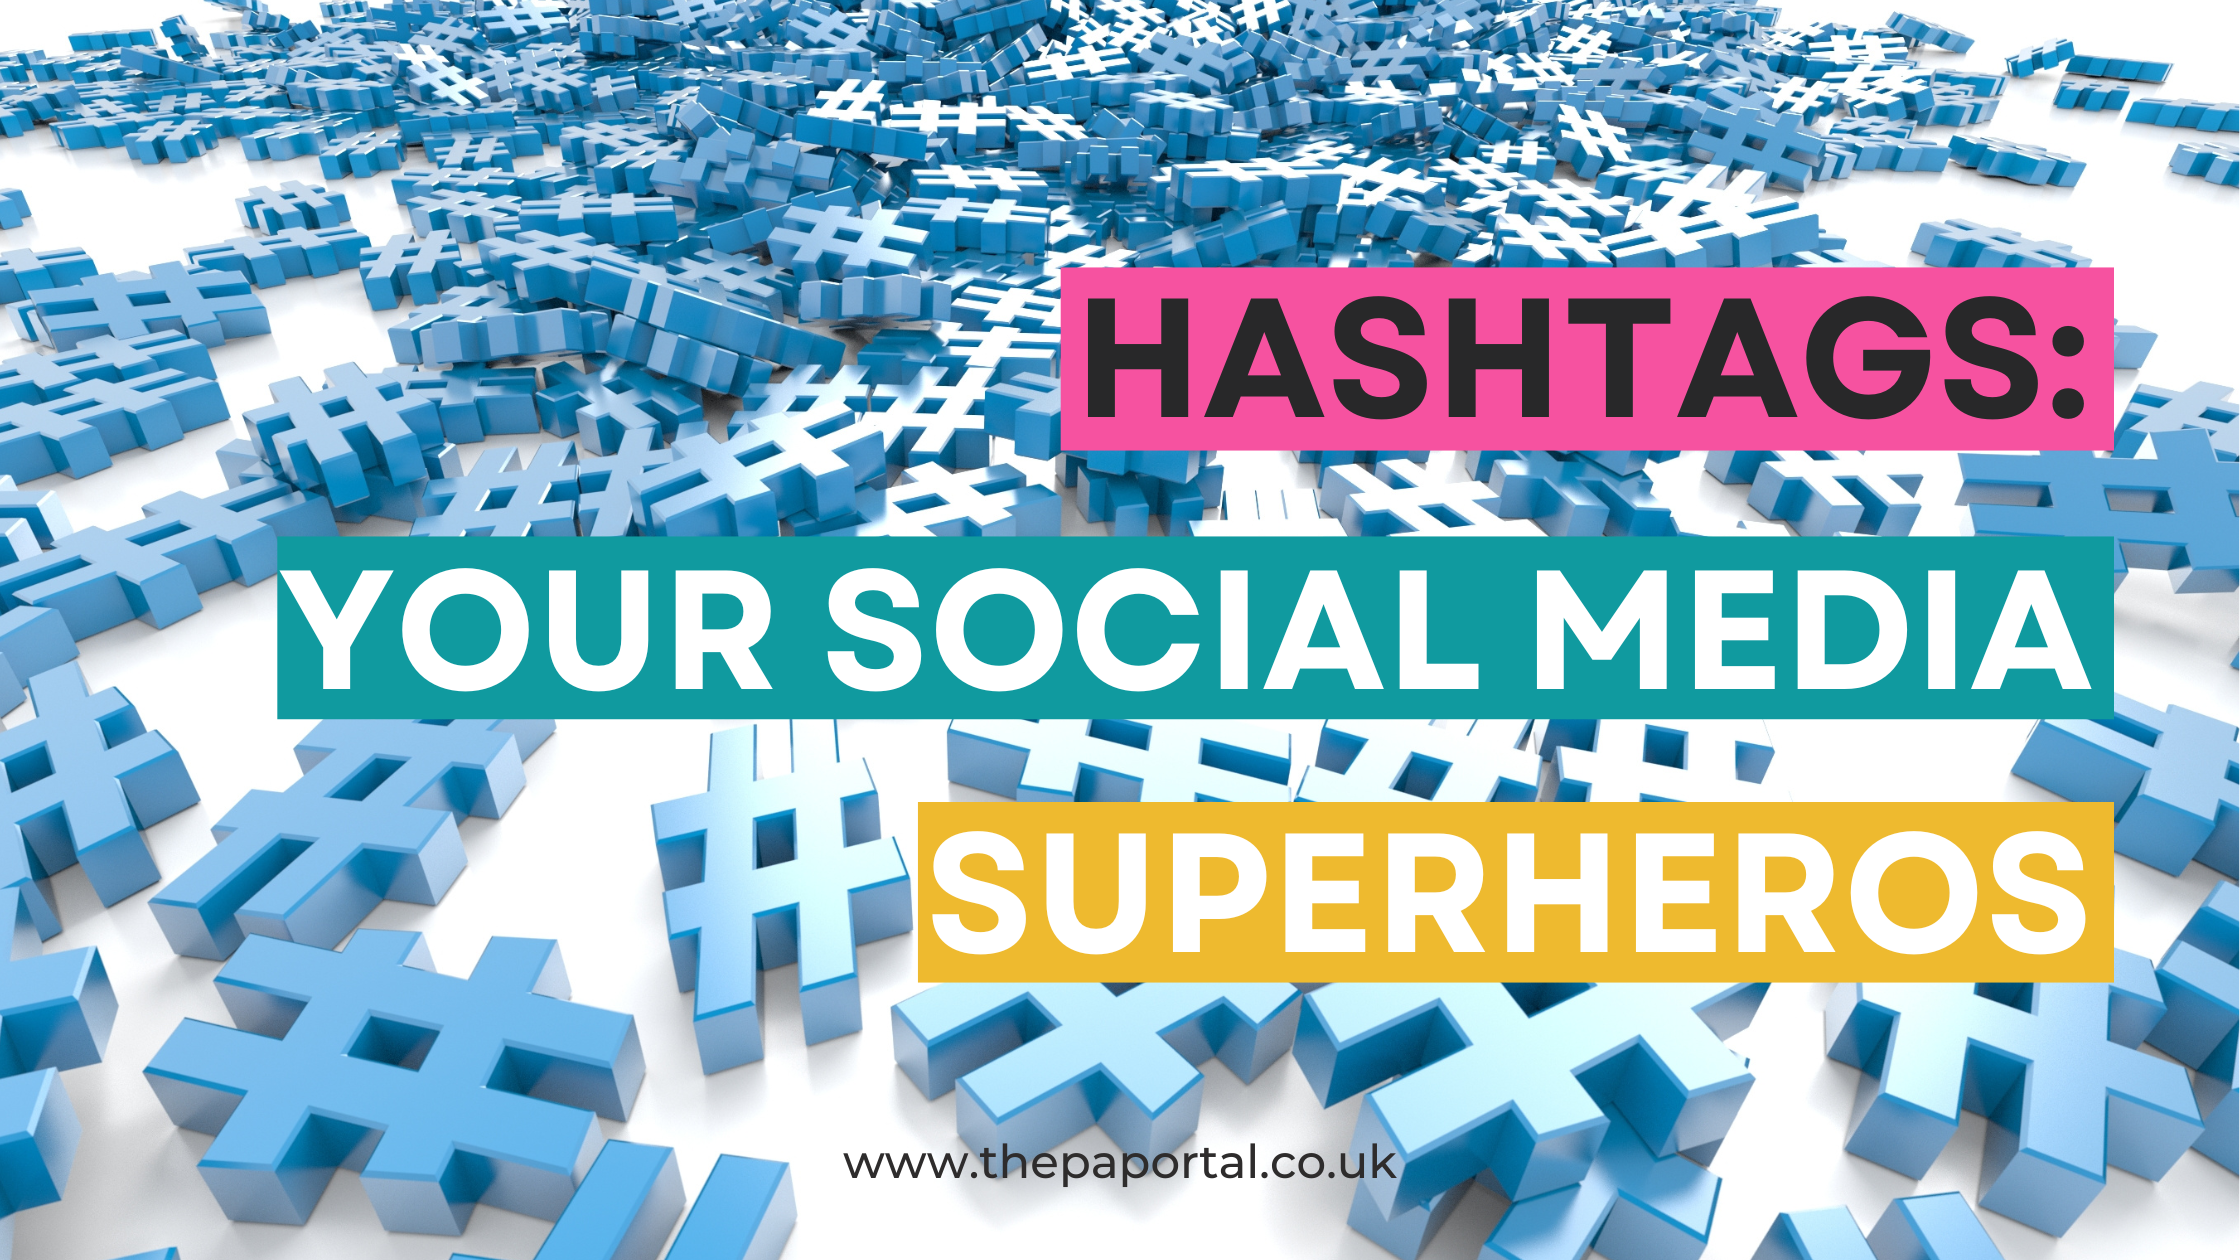 Image of blue hashtags on a white background with the title Hashtags: Your Social Media Superheroes